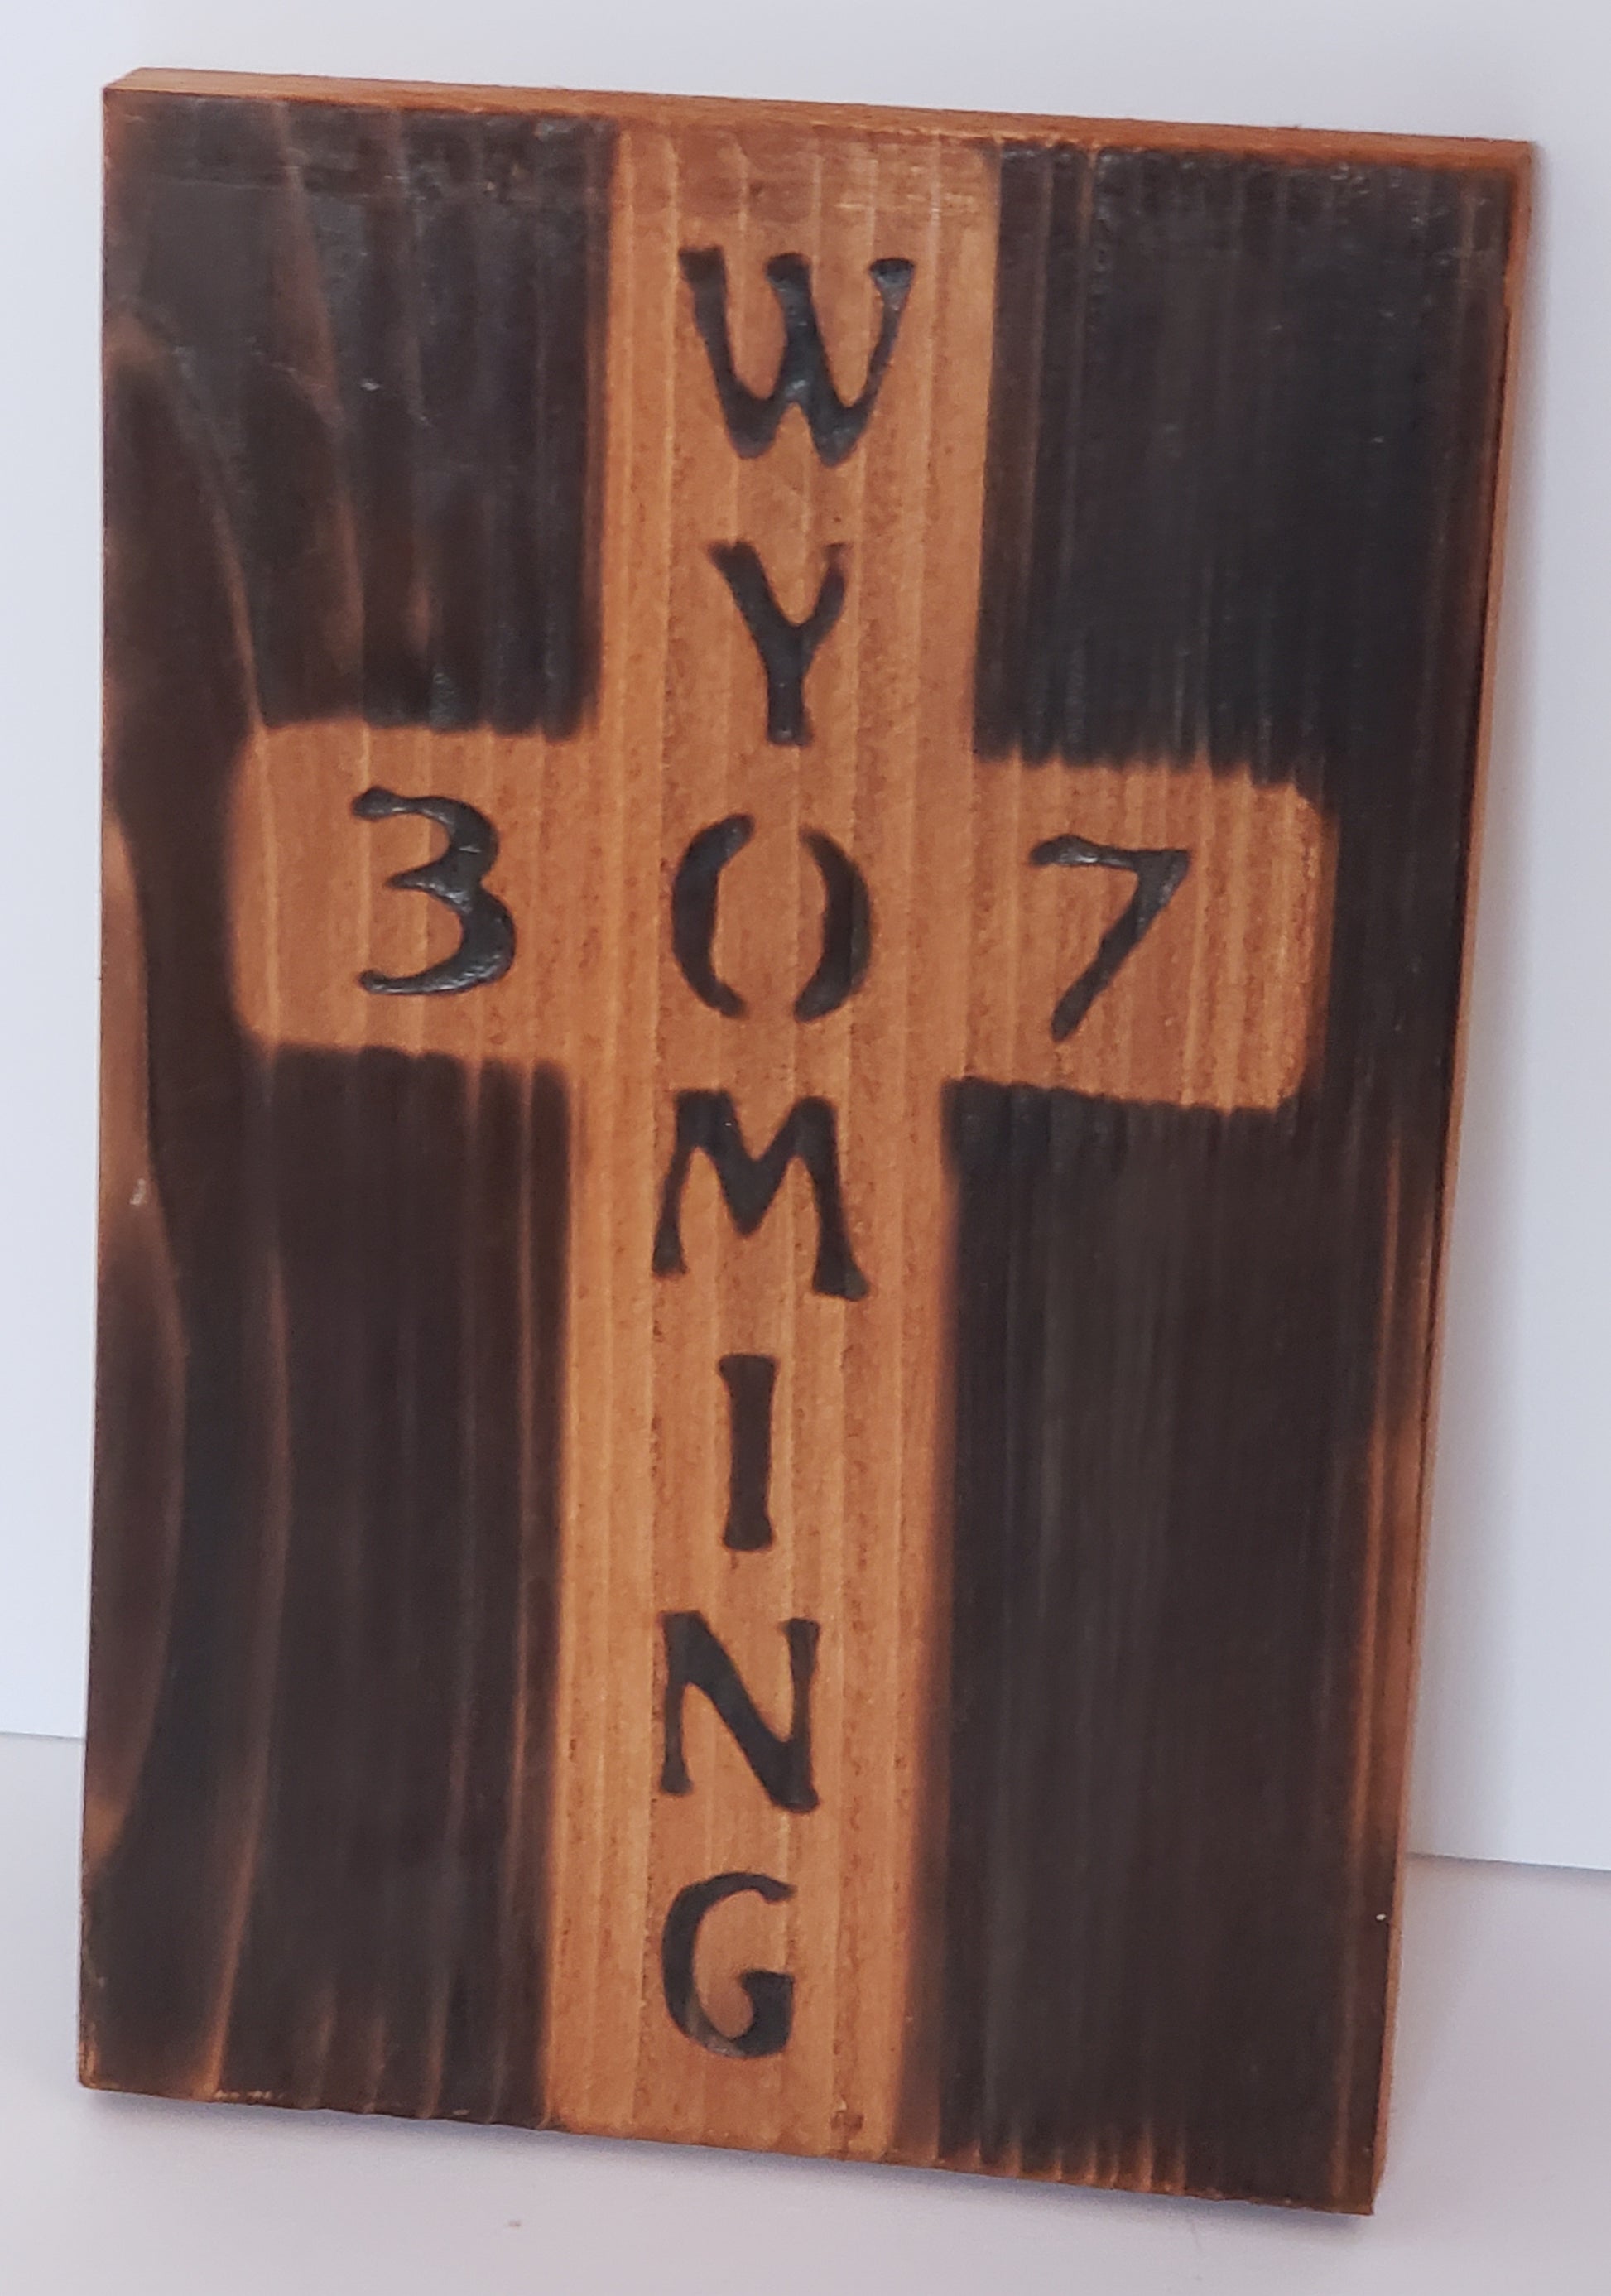 Wyoming and 307 Wood Burned Cross Artist: Michael McMahon  8 1/4" long x 5 1/4" wide x 1/2" high  Rectangle cedar board with the word Wyoming and 307 burned into the board  Wood frame  burned and wire brushed color and clear protective polyurethane finish  Wire hanger on the back  Wood stain color may vary slightly.